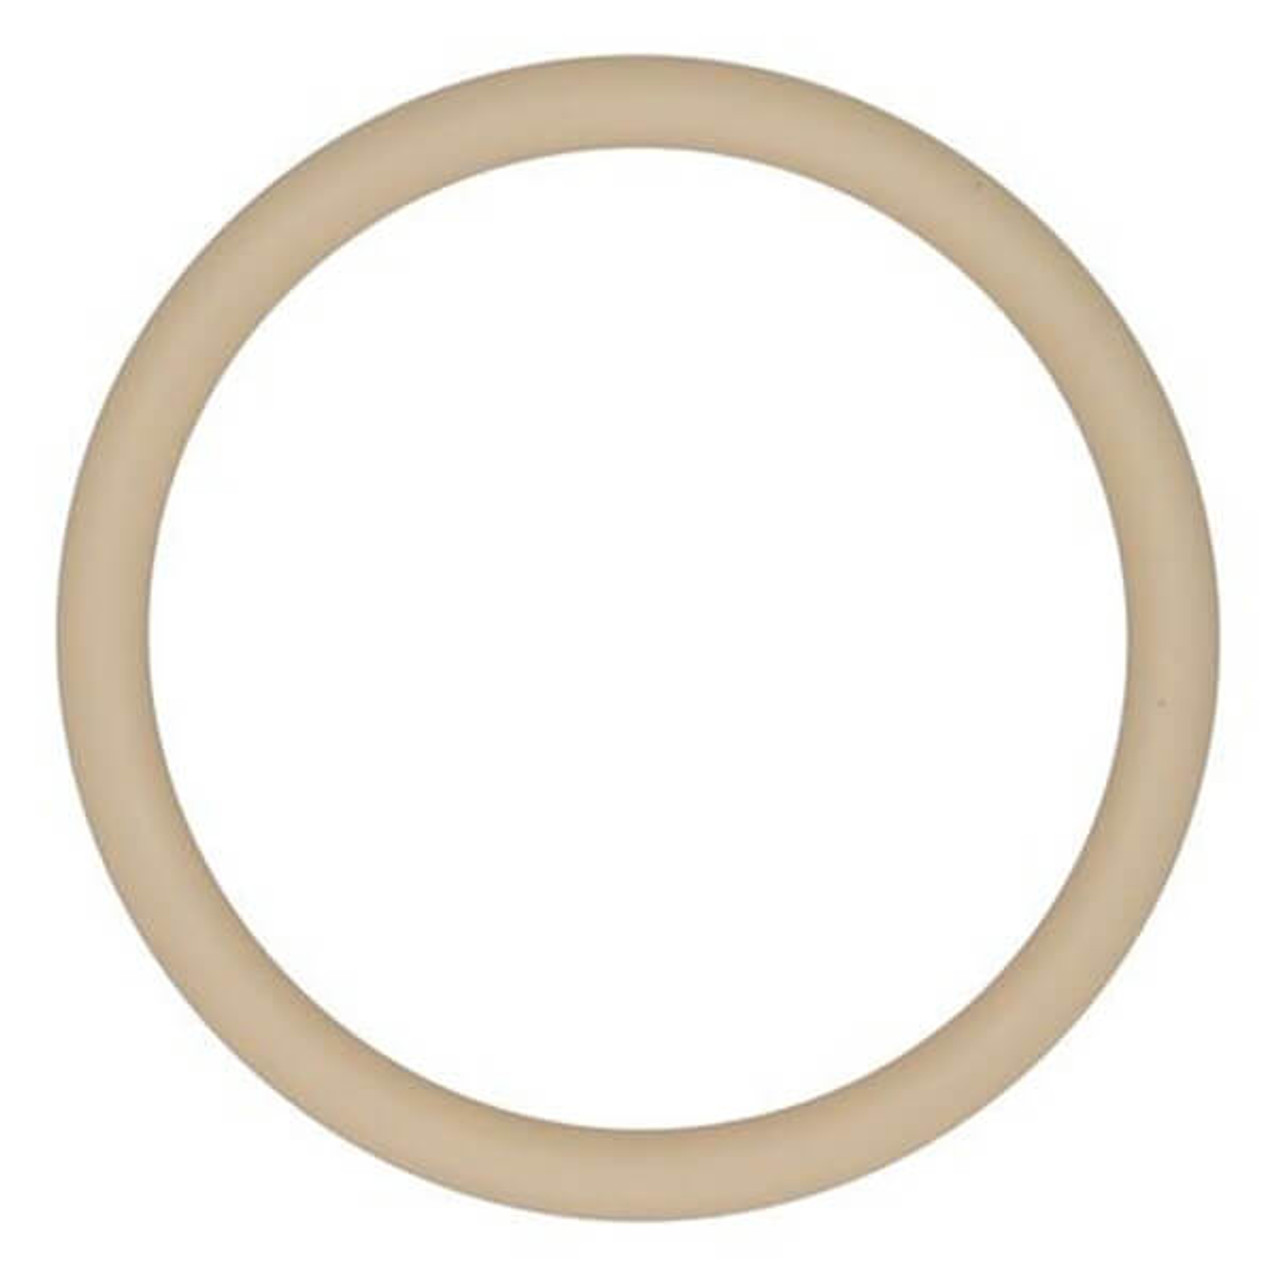 08-1300-58-500 Wilflex O-Ring for 2" Pumps